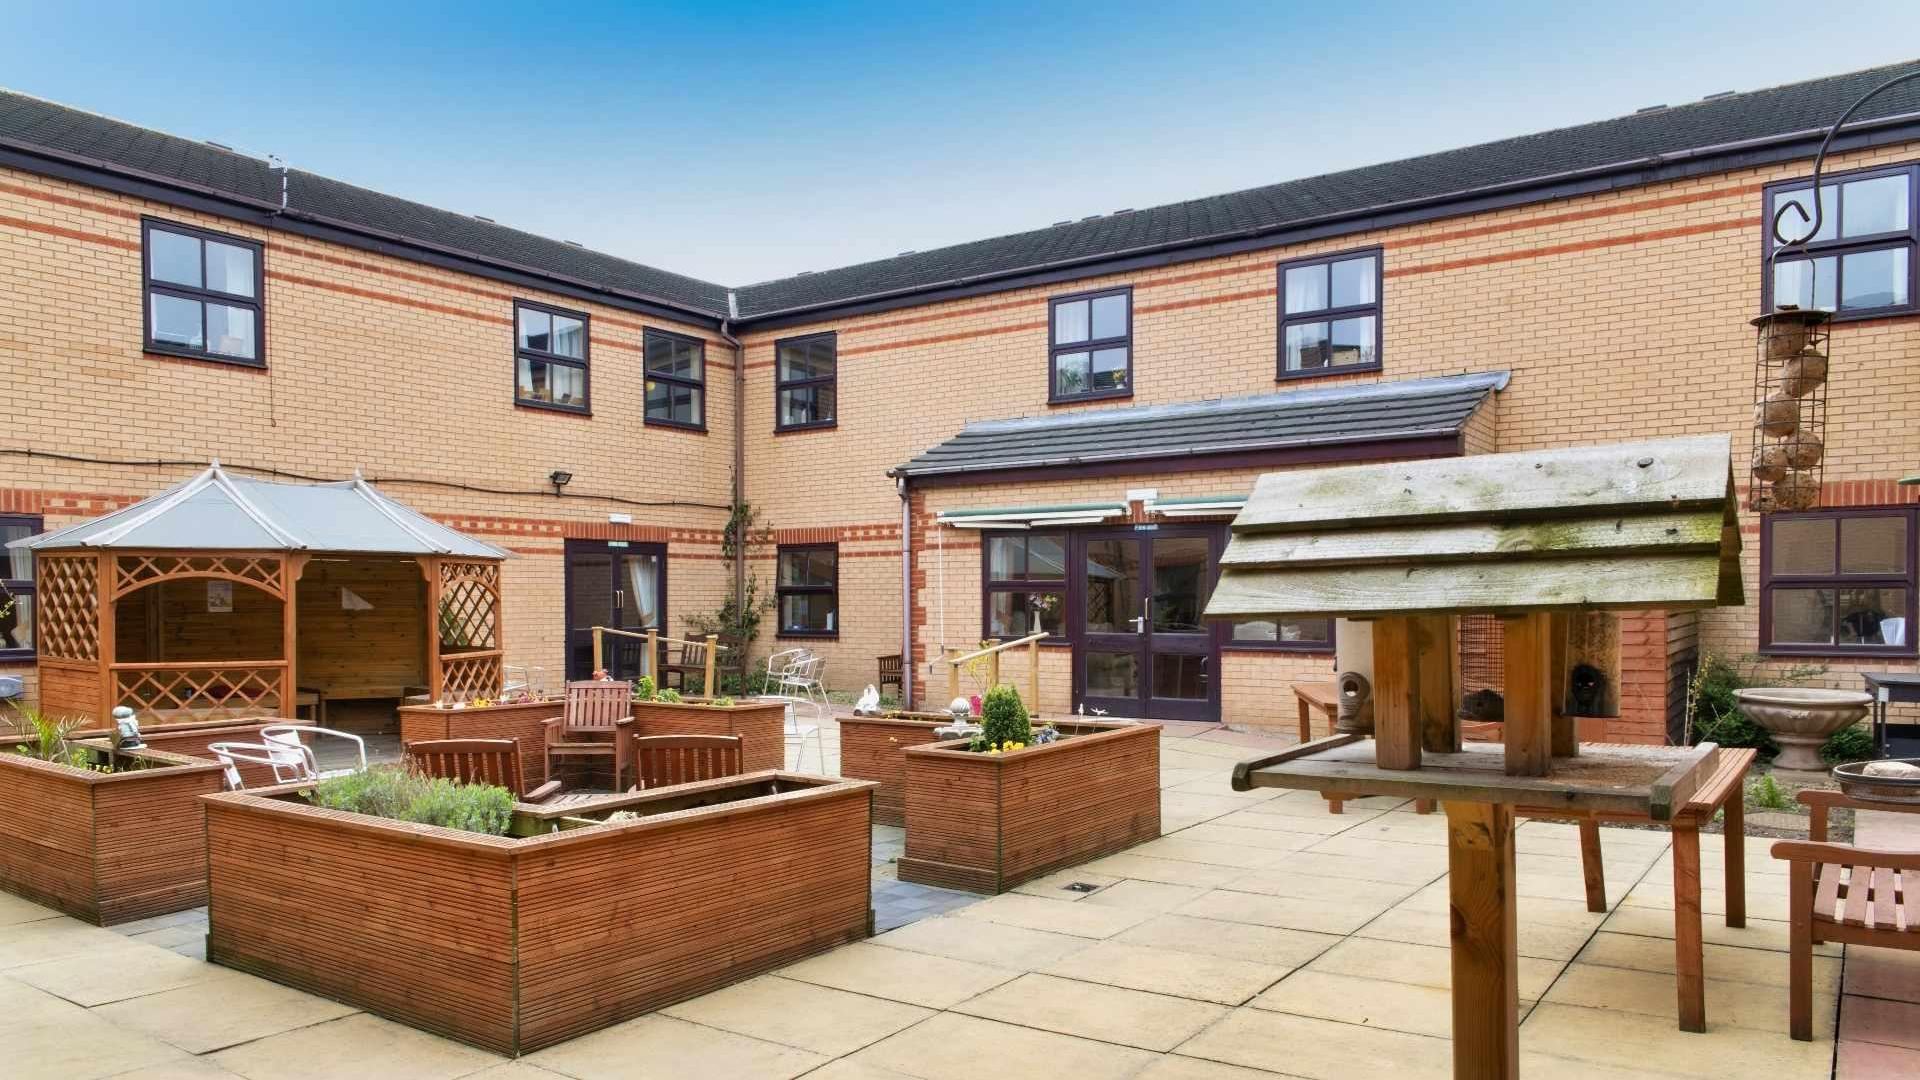 langfield residential care home in middleton